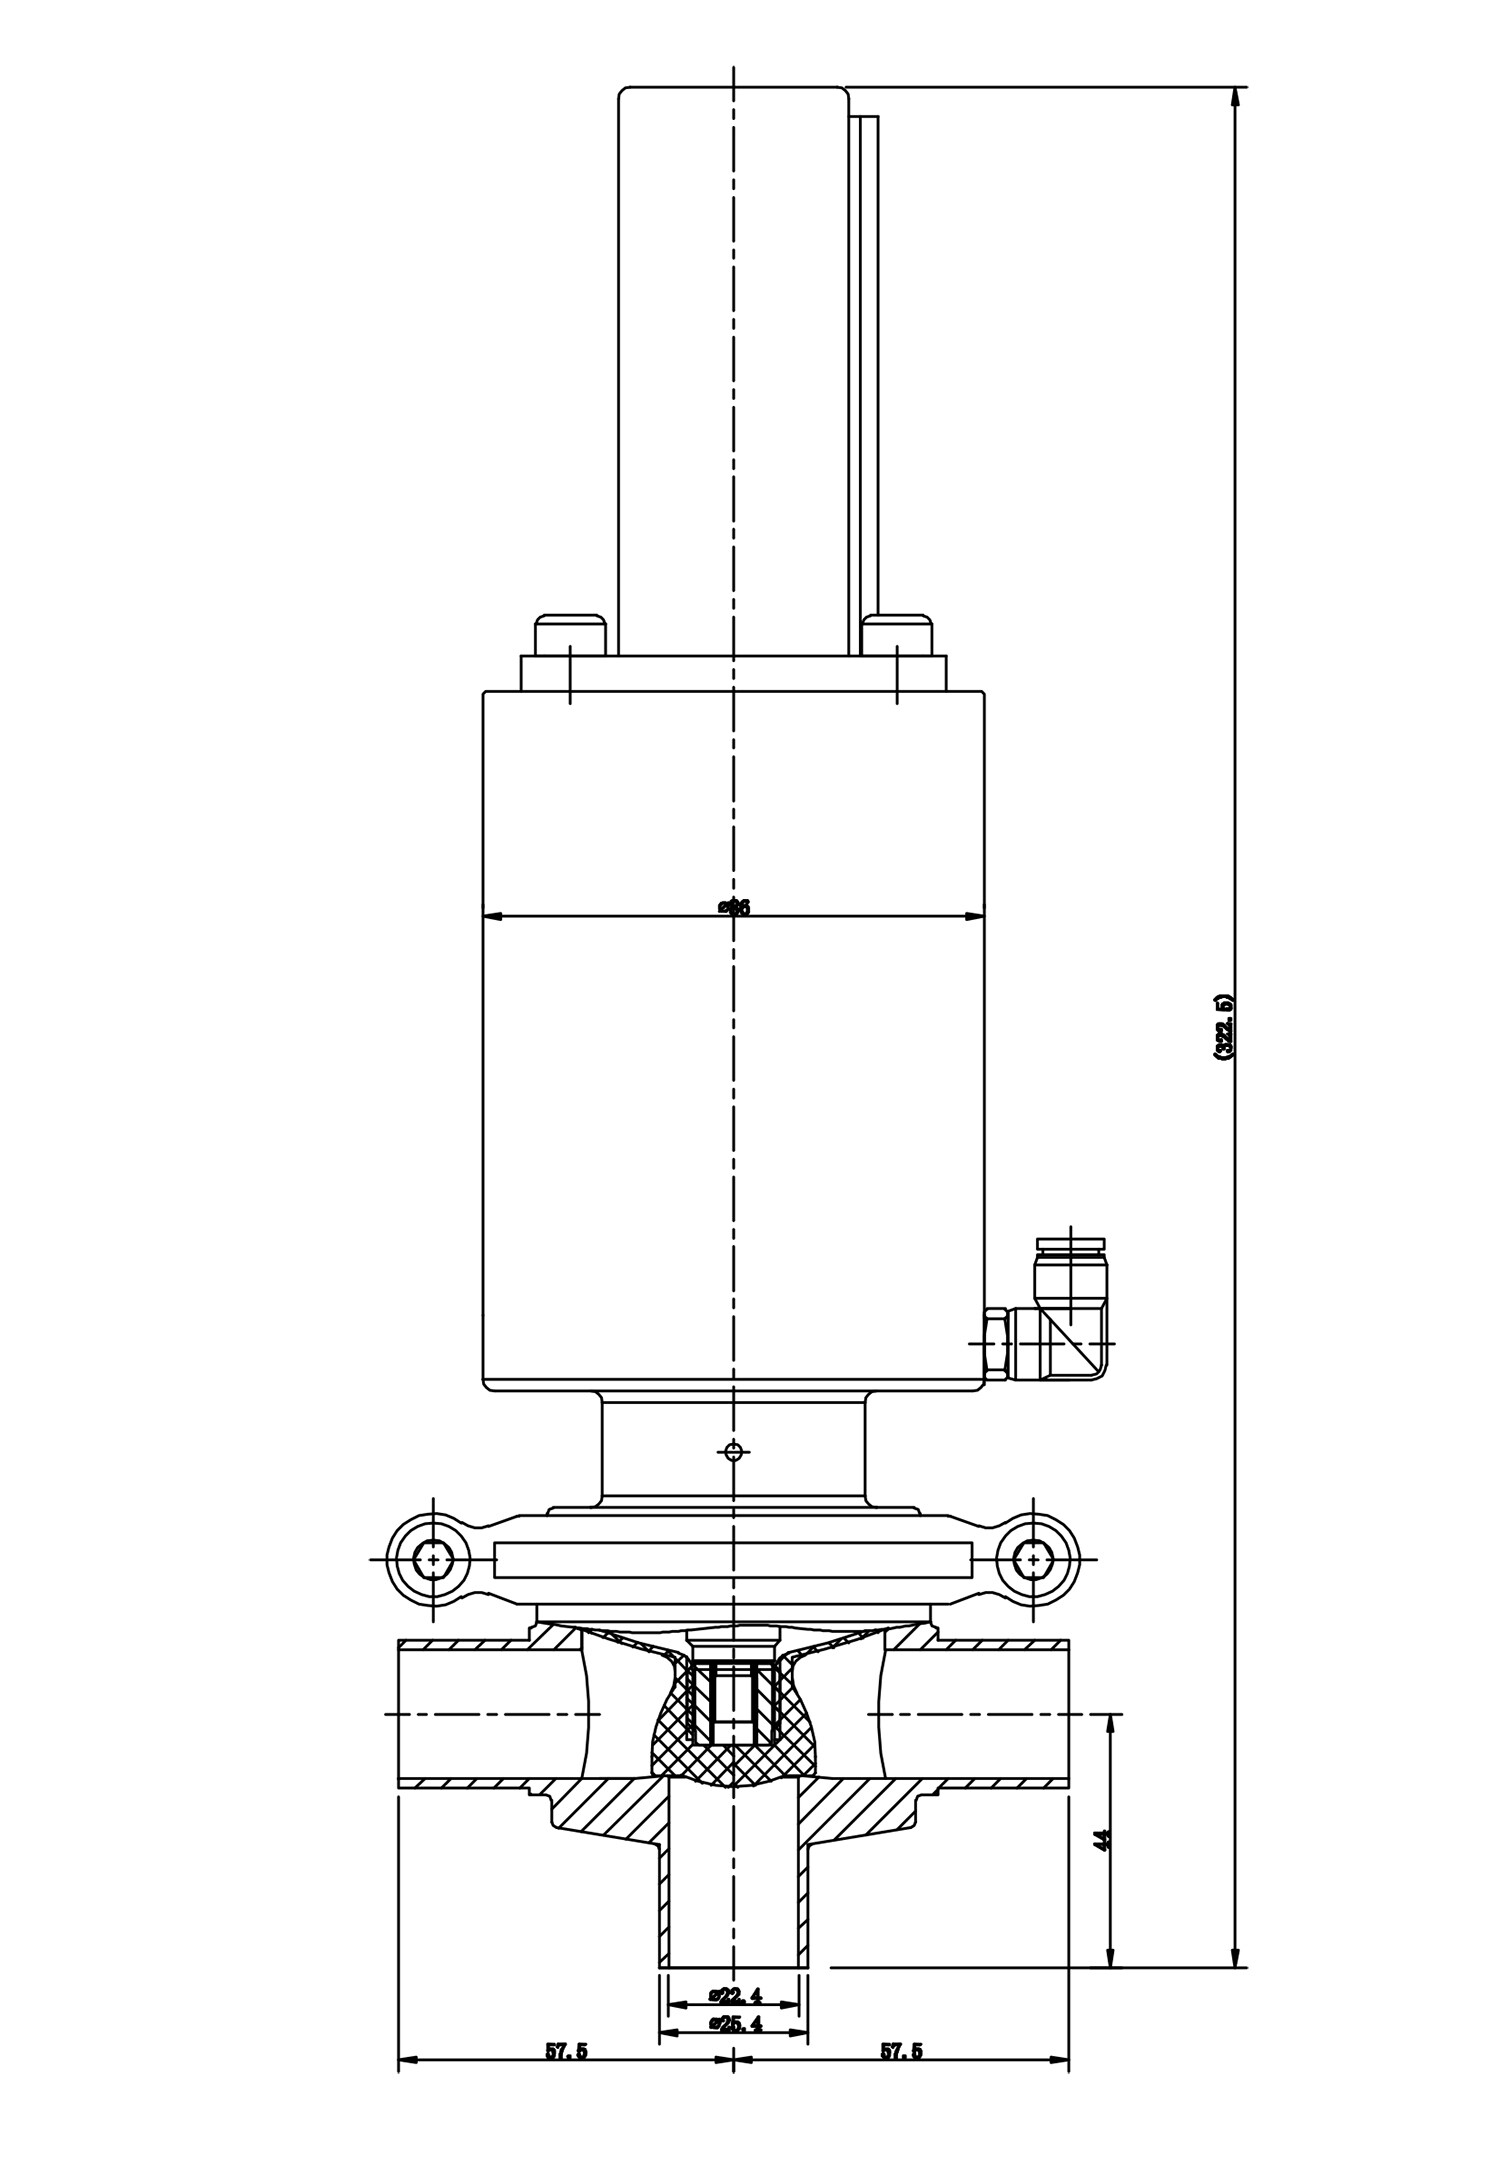 Aseptic Pneumatic Diverter Valve with Controller